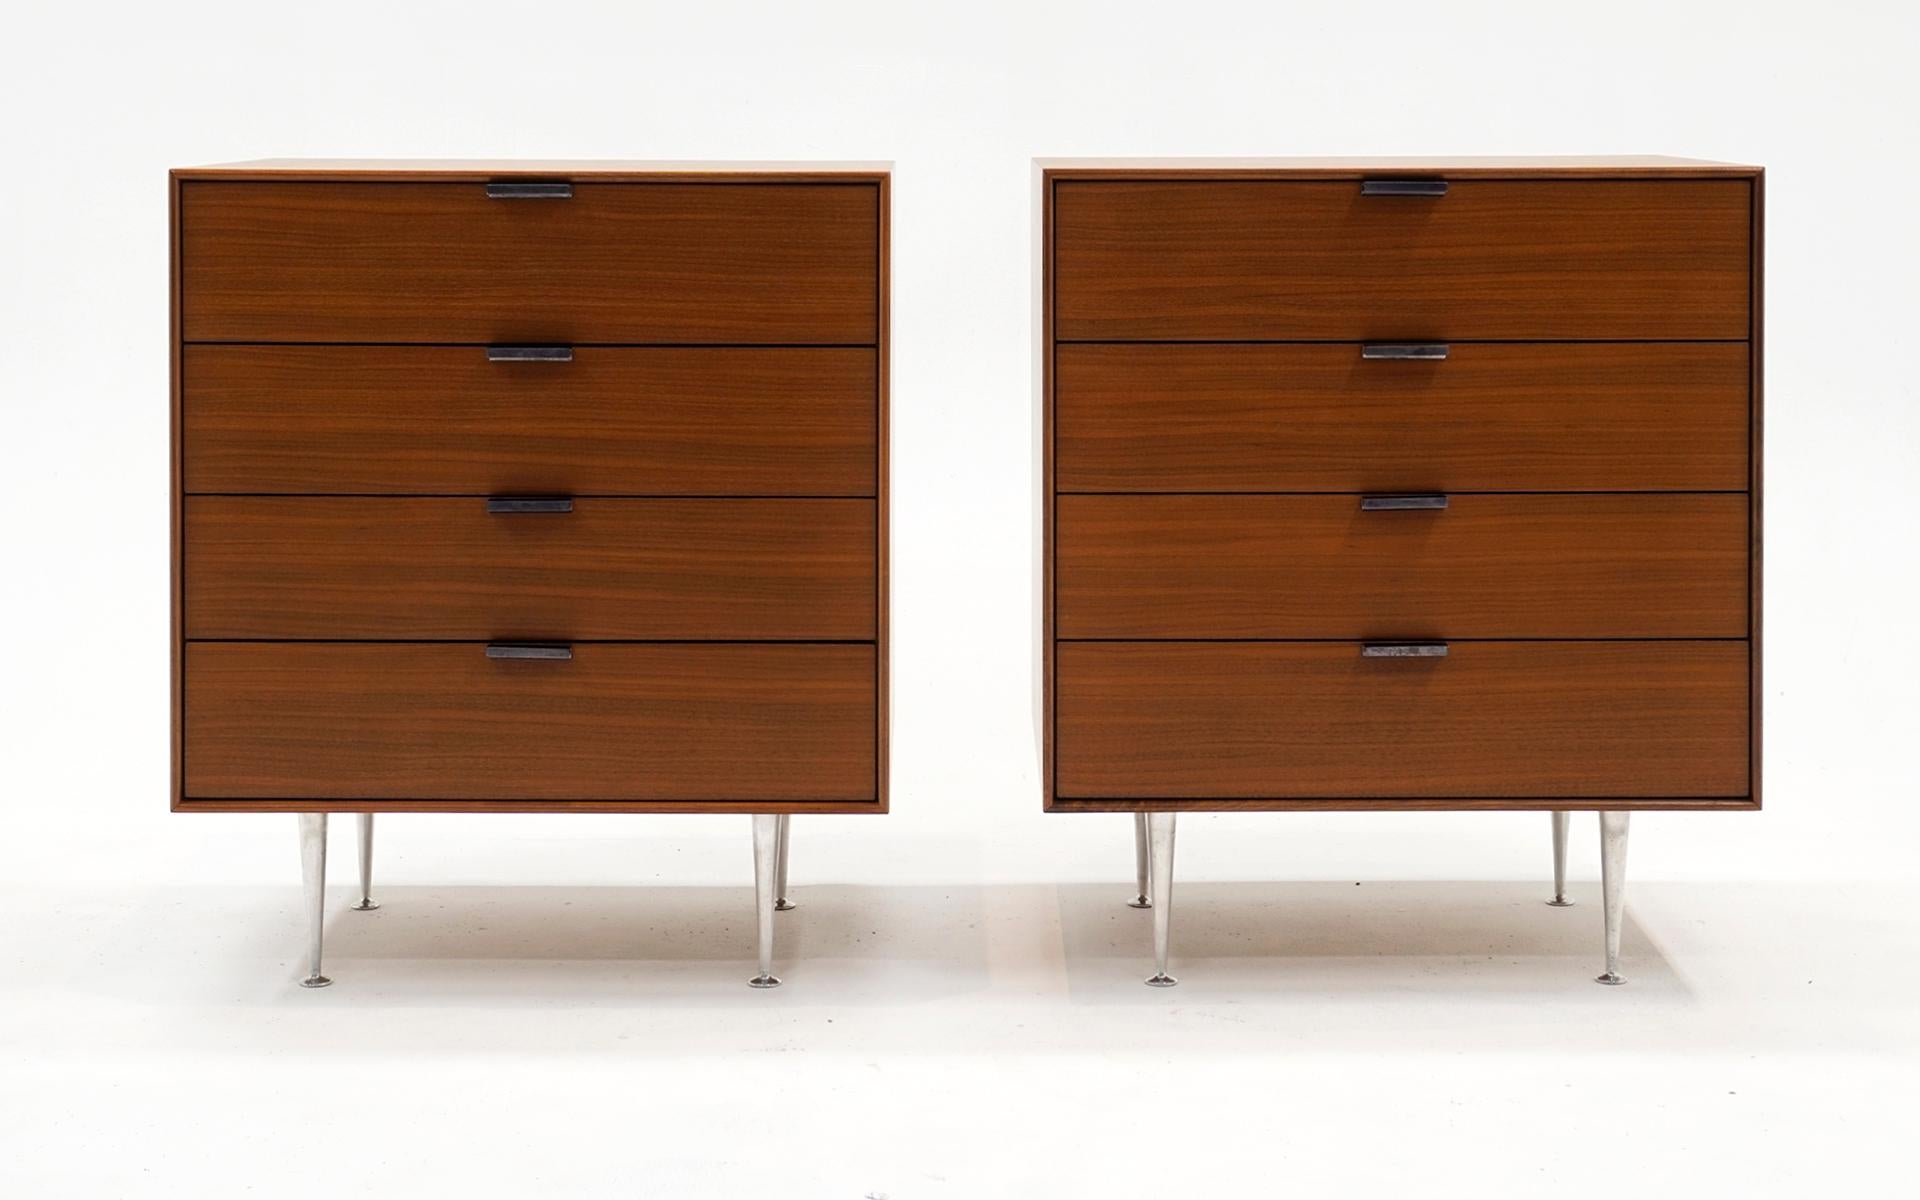 Pair of George Nelson & Associates for Herman Miller Thin Edge cabinets model 4701. Teak cases with anodized aluminum pulls and cast aluminum legs. Each cabinet features four drawers. Signed with the Metal disc manufacturer's label to top-right